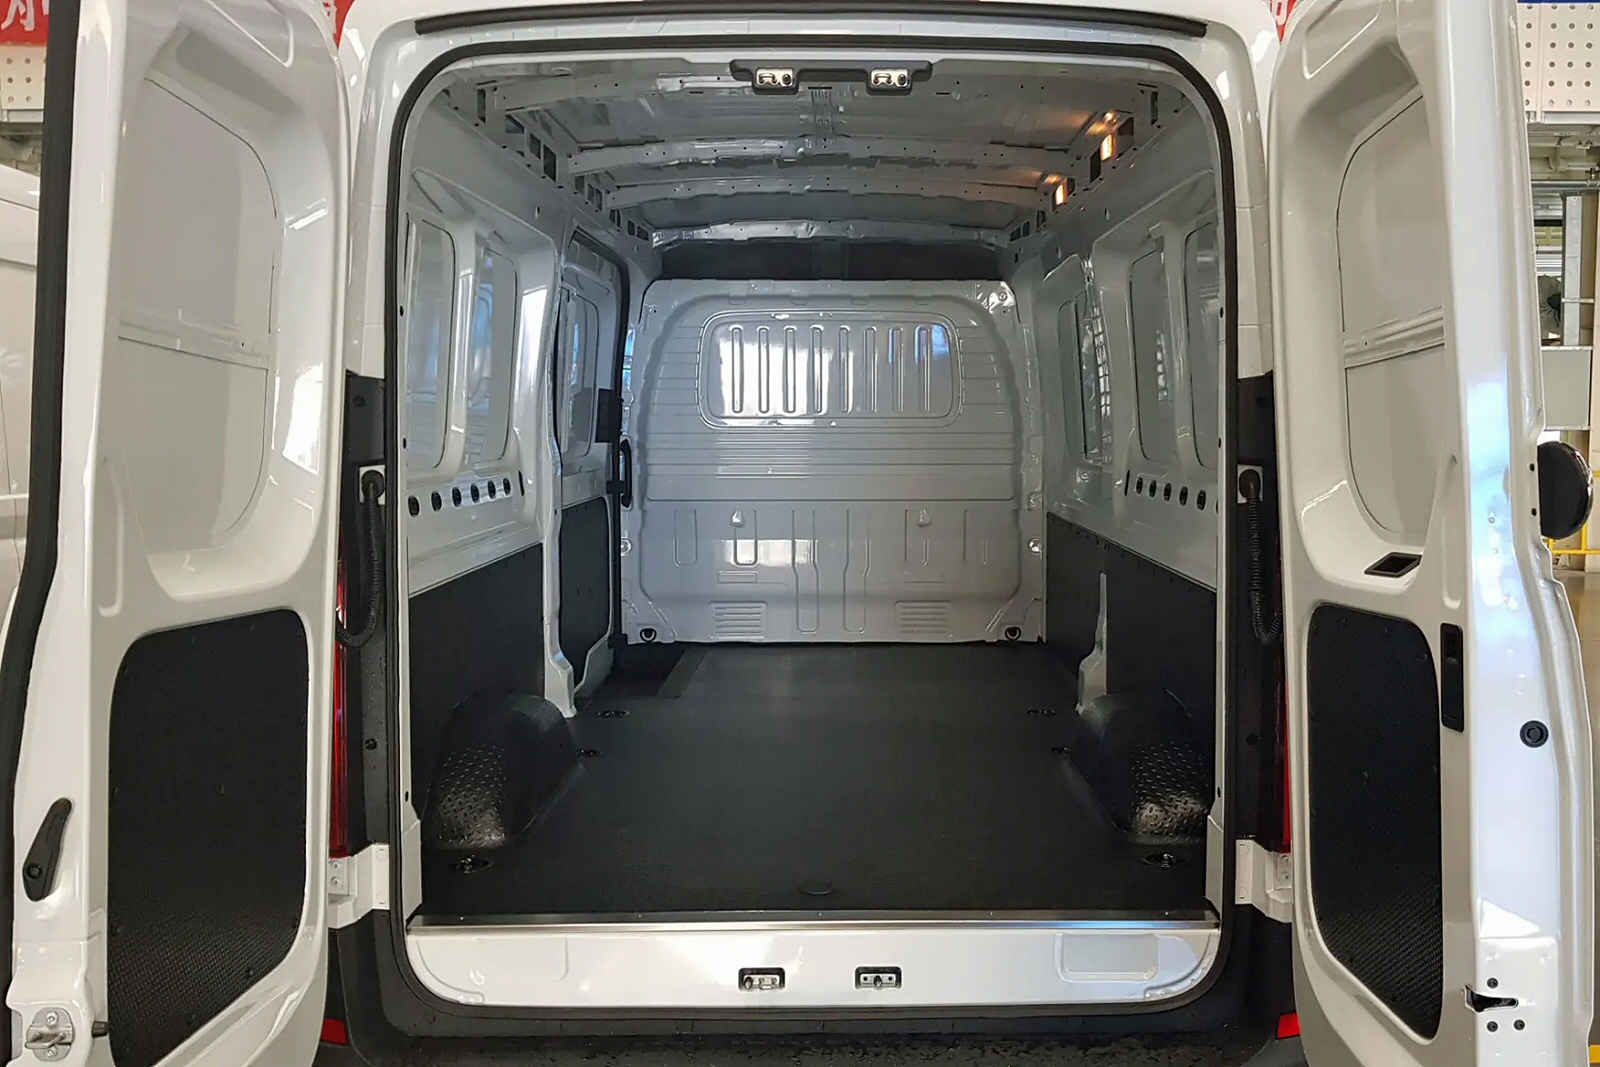 MAXUS E DELIVER 9 LWB ELECTRIC FWD 150kW High Roof Van 88.5kWh N2 Auto